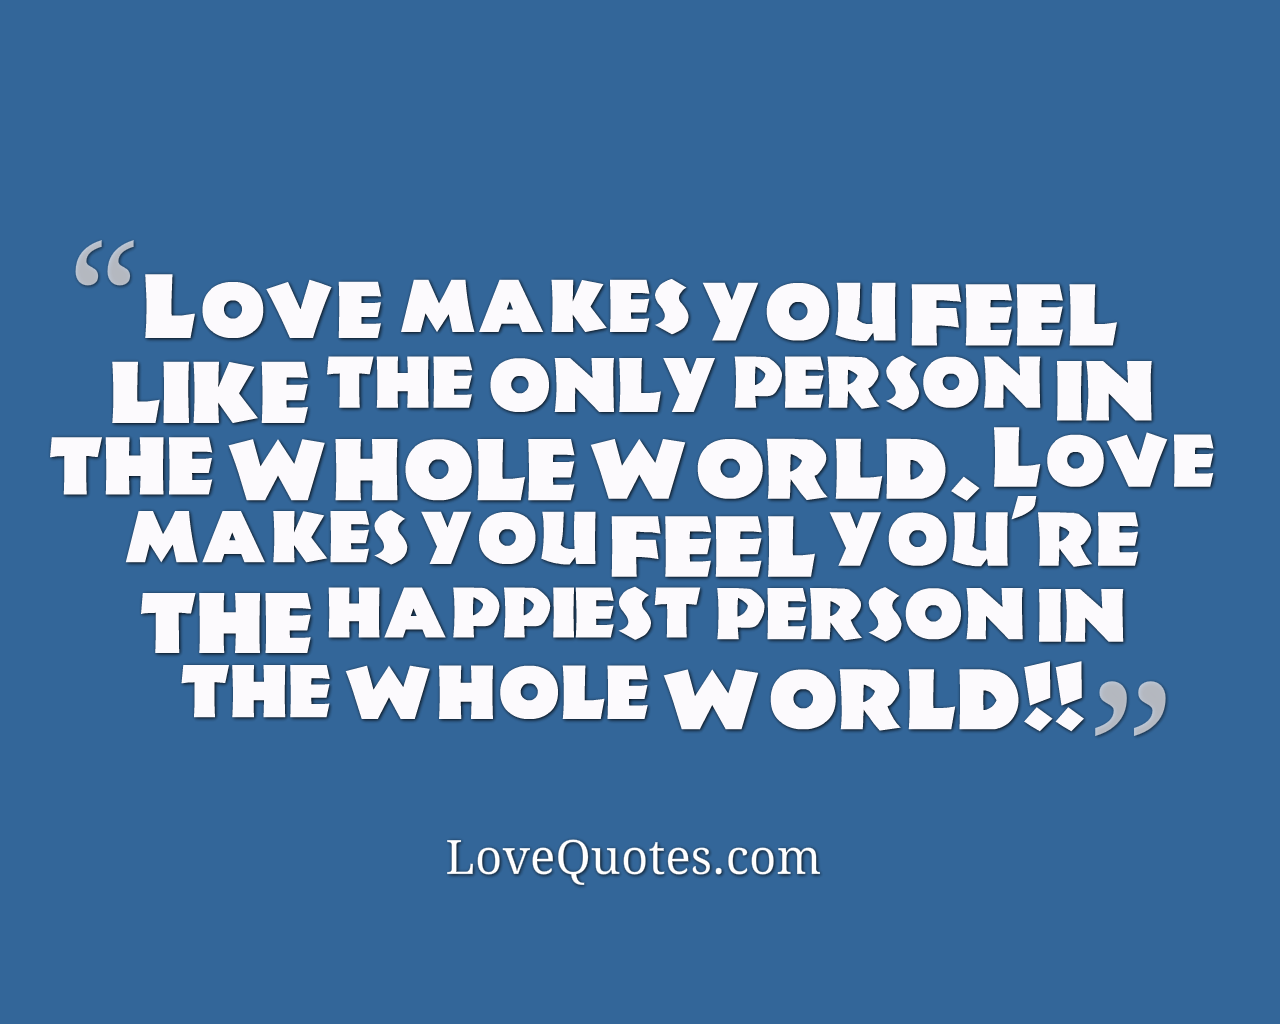 Love Makes You Feel - Love Quotes